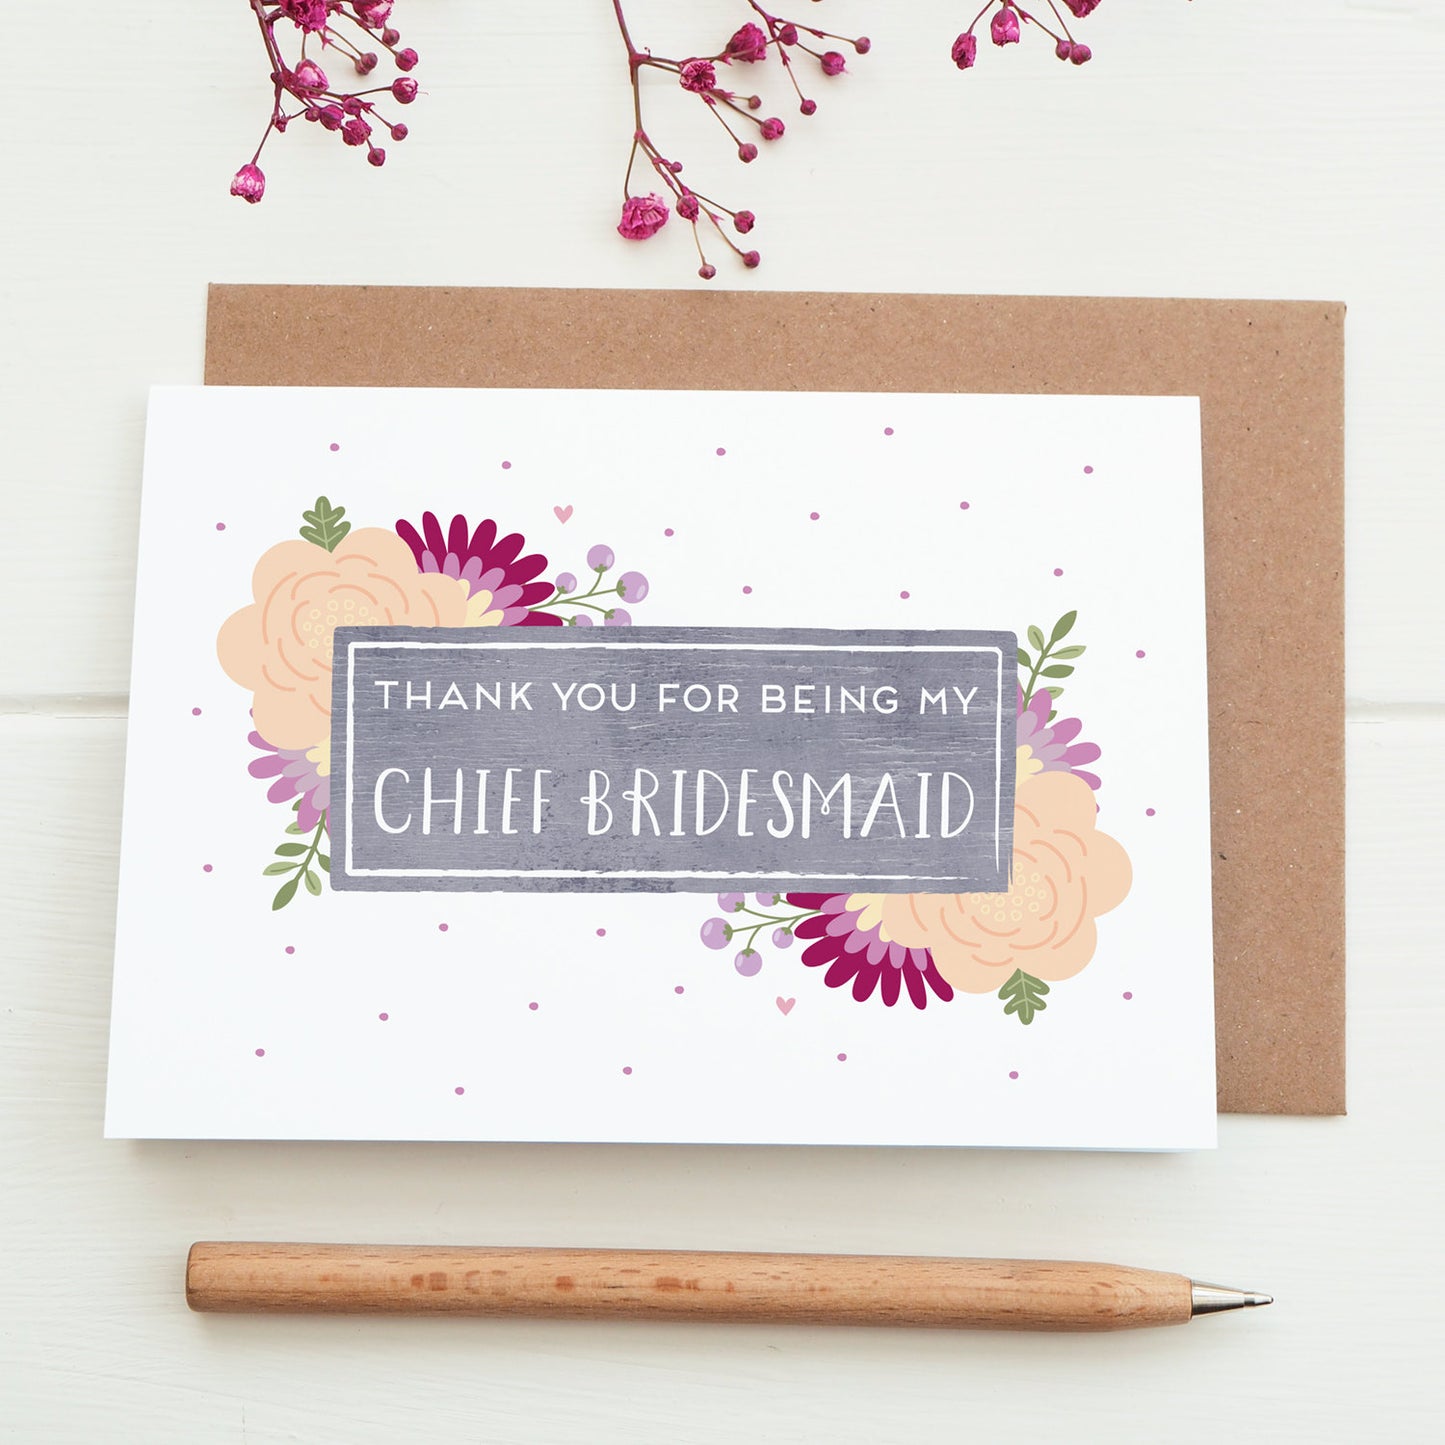 Thank you for being my chief bridesmaid card in purple